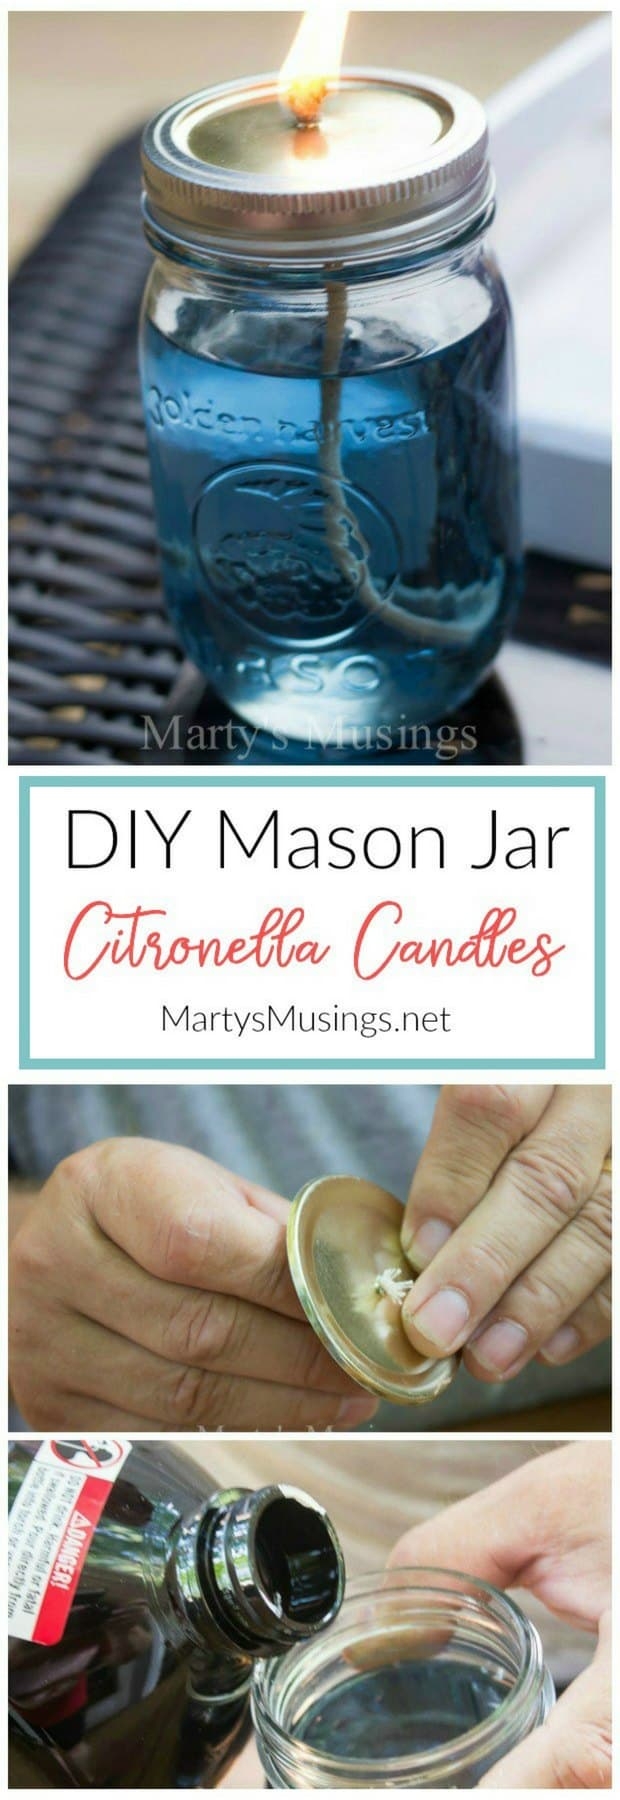 Mosquitoes drive you crazy in the summer? I'm here to show you how to make citronella candles that are easy and inexpensive, the perfect DIY project to chase away those pesky bugs!